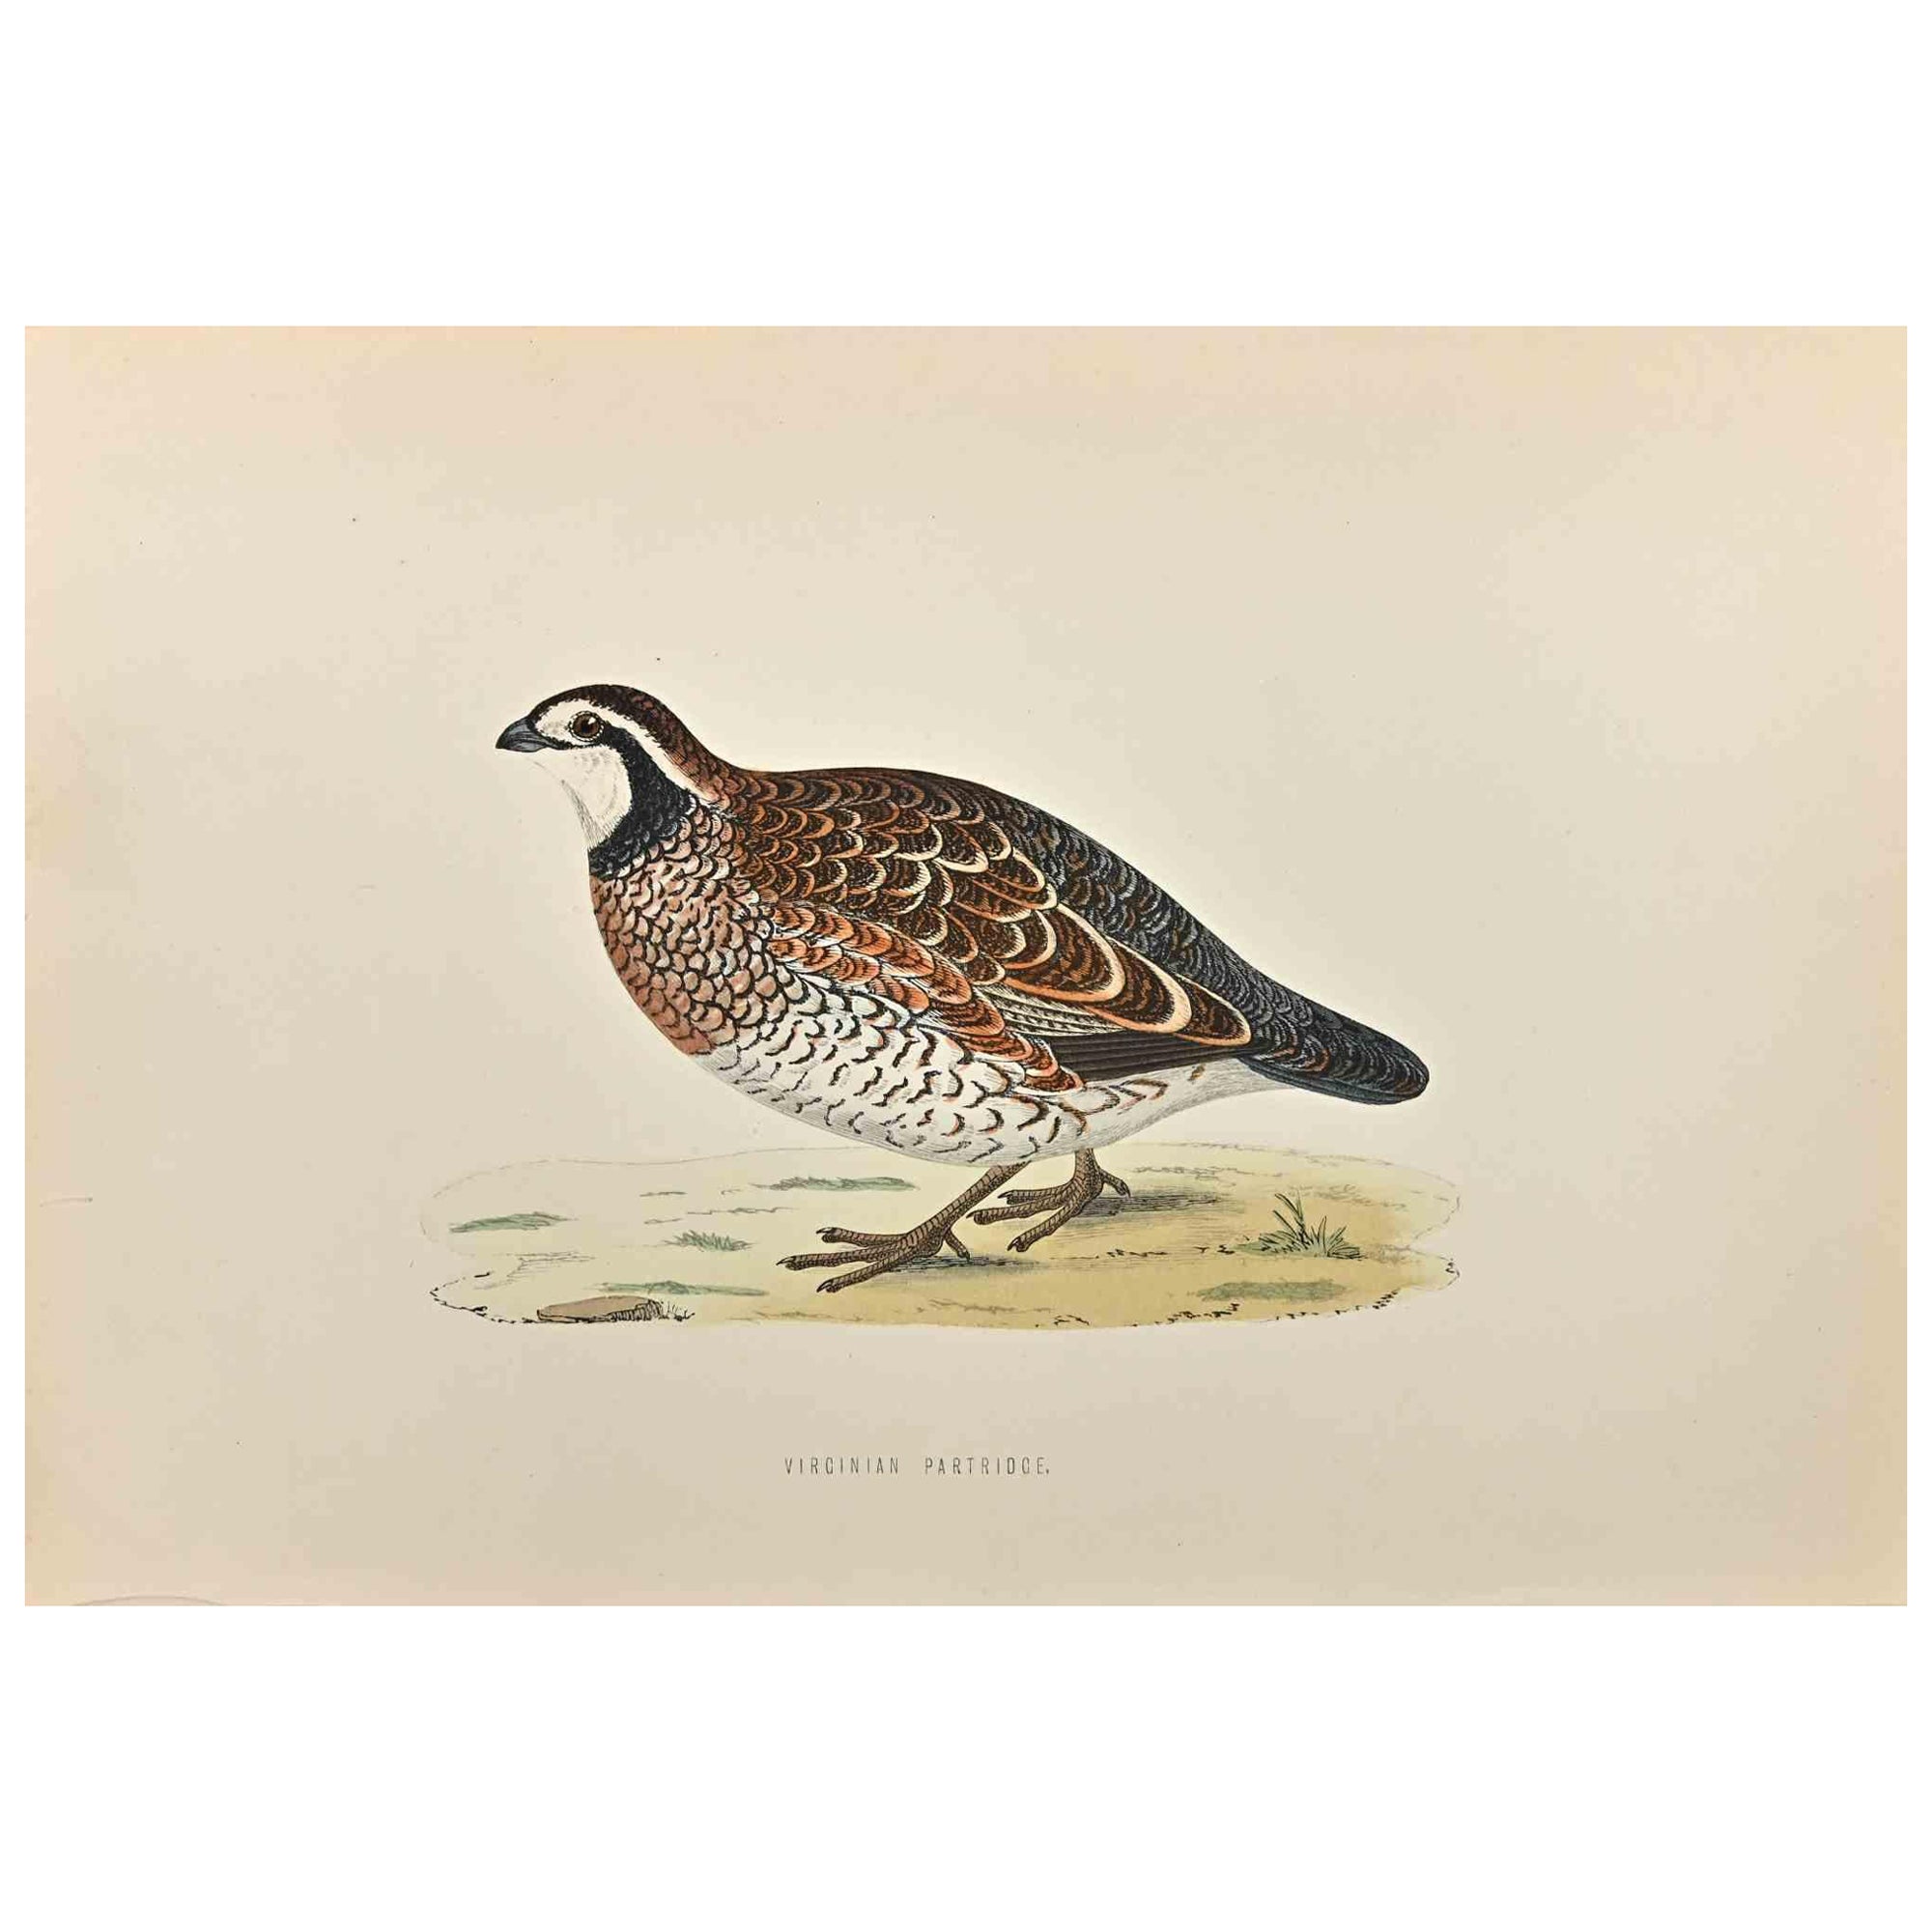 Virginian Partridge is a modern artwork realized in 1870 by the British artist Alexander Francis Lydon (1836-1917).

Woodcut print on ivory-colored paper.

Hand-colored, published by London, Bell & Sons, 1870.  

The name of the bird is printed on